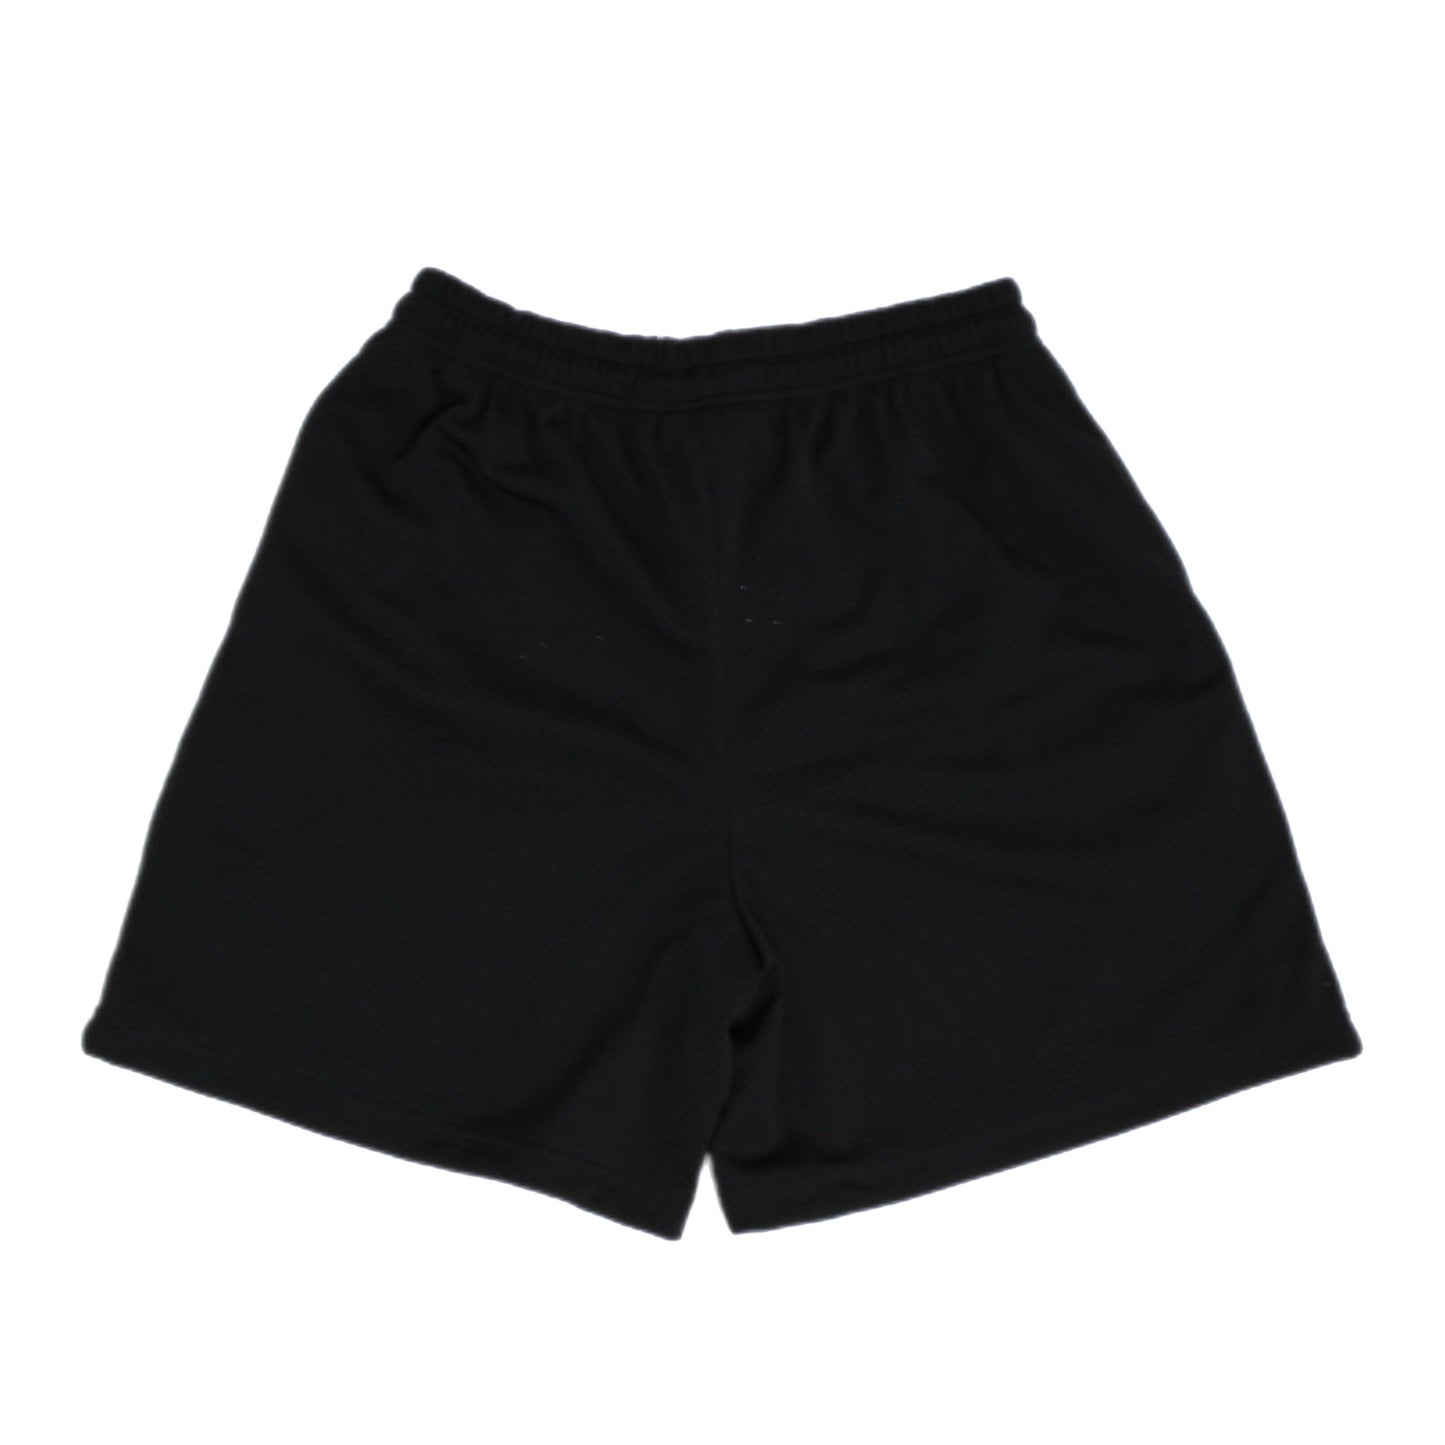 EVOL 777 Shorts Black And Red